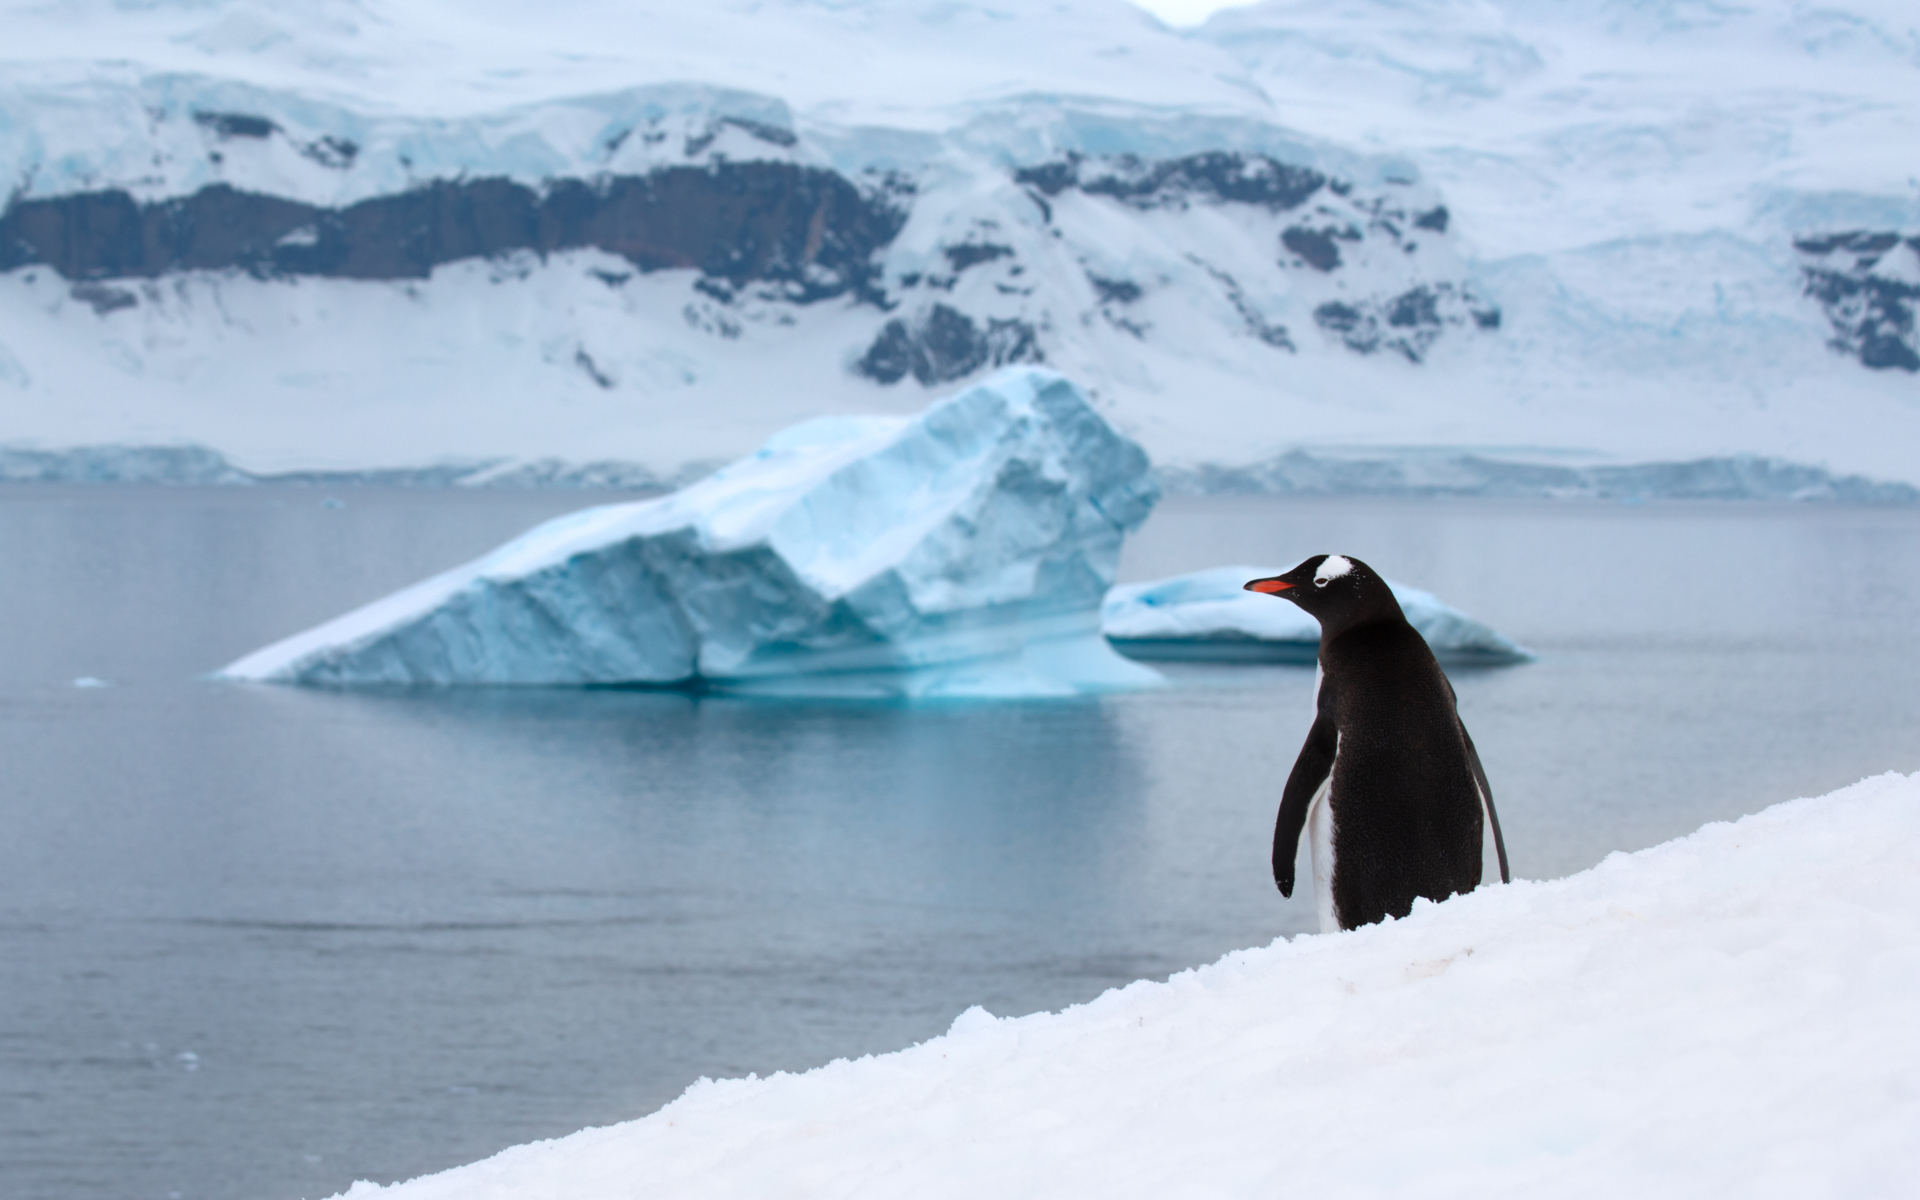 A solo penguin stands on snowy hill overlooking a bay in Antarctica filled with giant icebergs and surrounded by mountains.